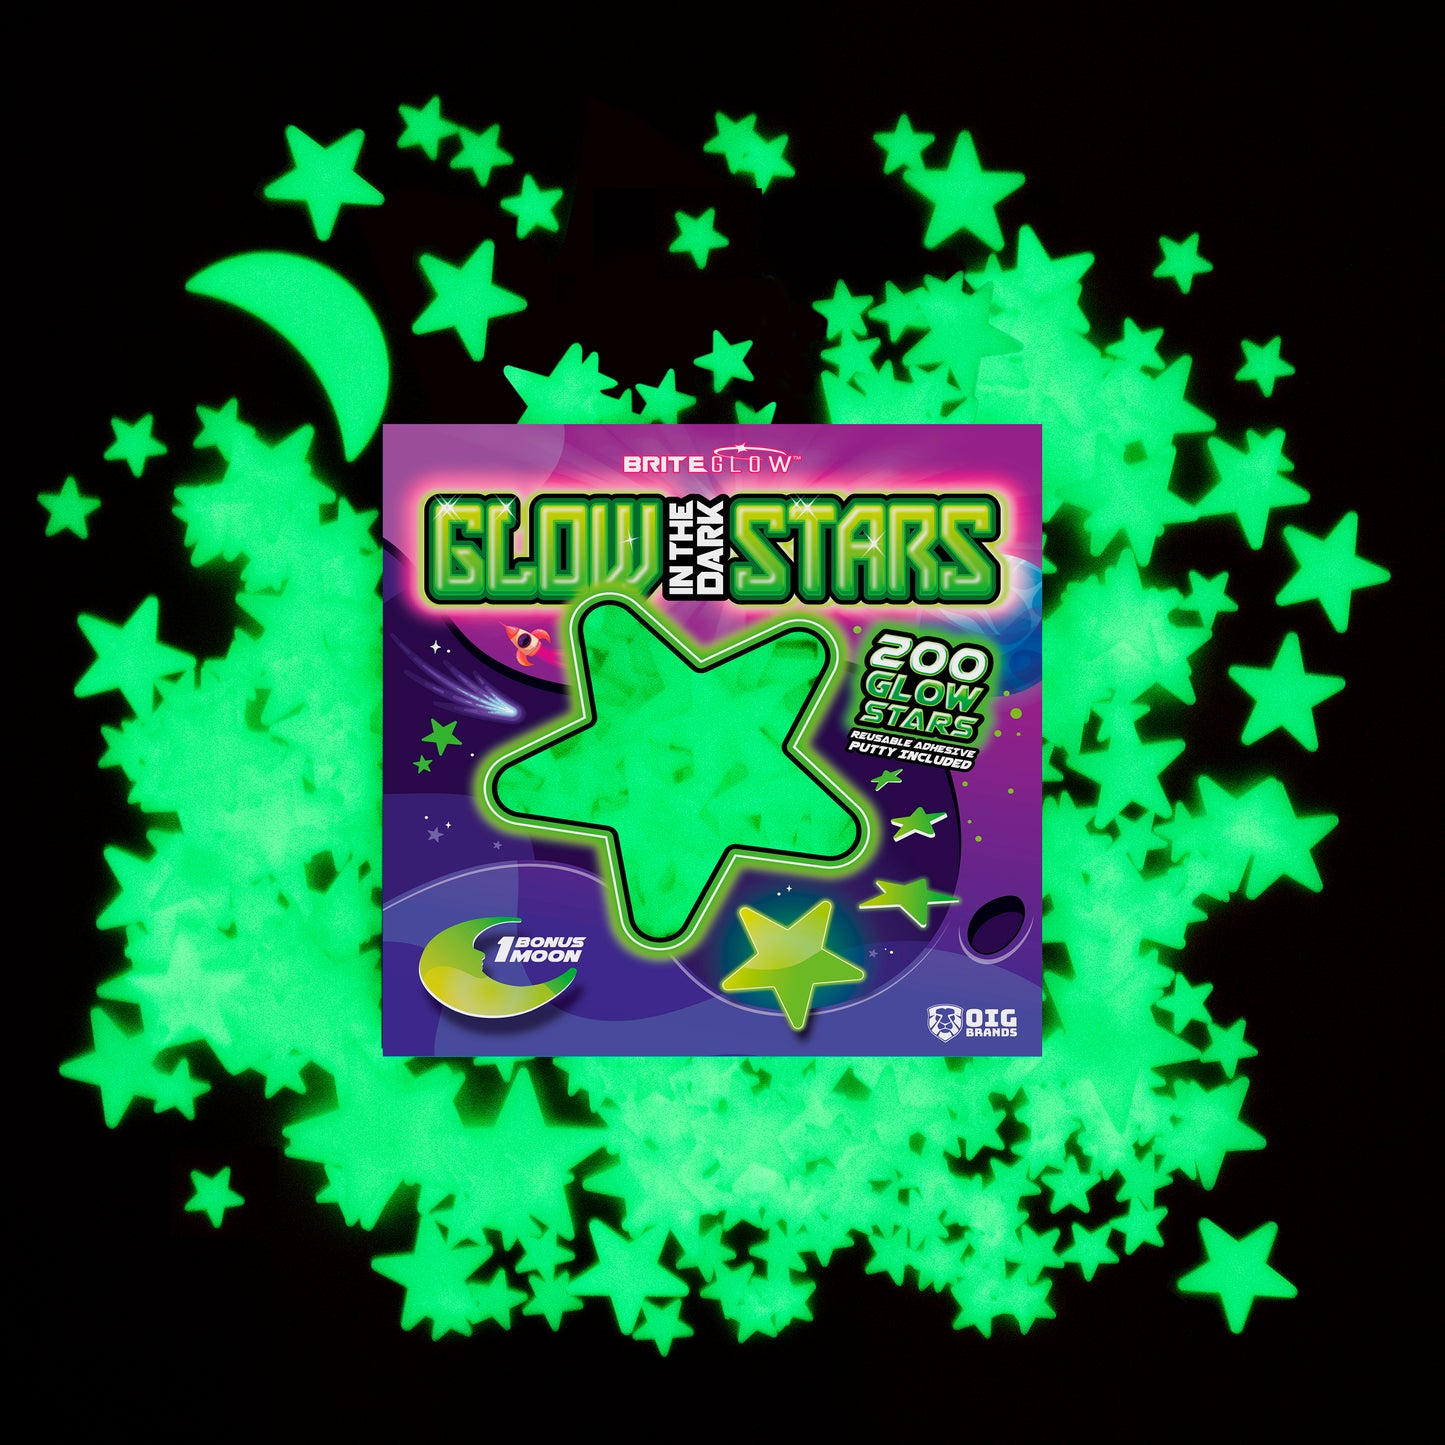 Ultra Brighter Glow in the Dark Stars; Special Deal 200 Count – OIG Brands